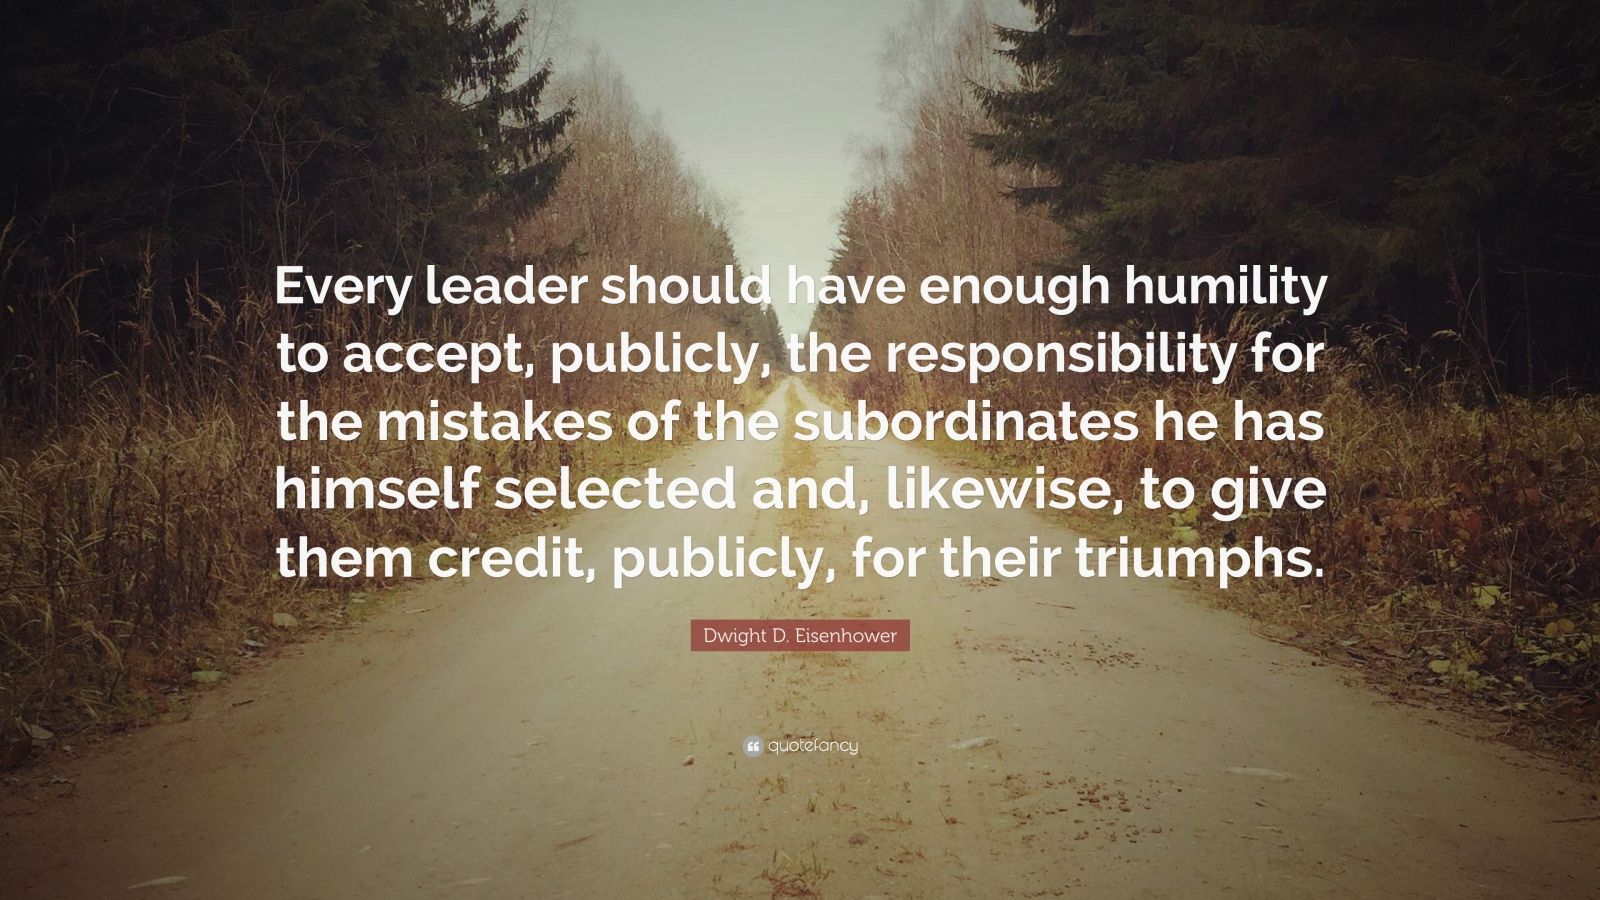 Dwight D. Eisenhower Quote: “Every leader should have enough humility ...